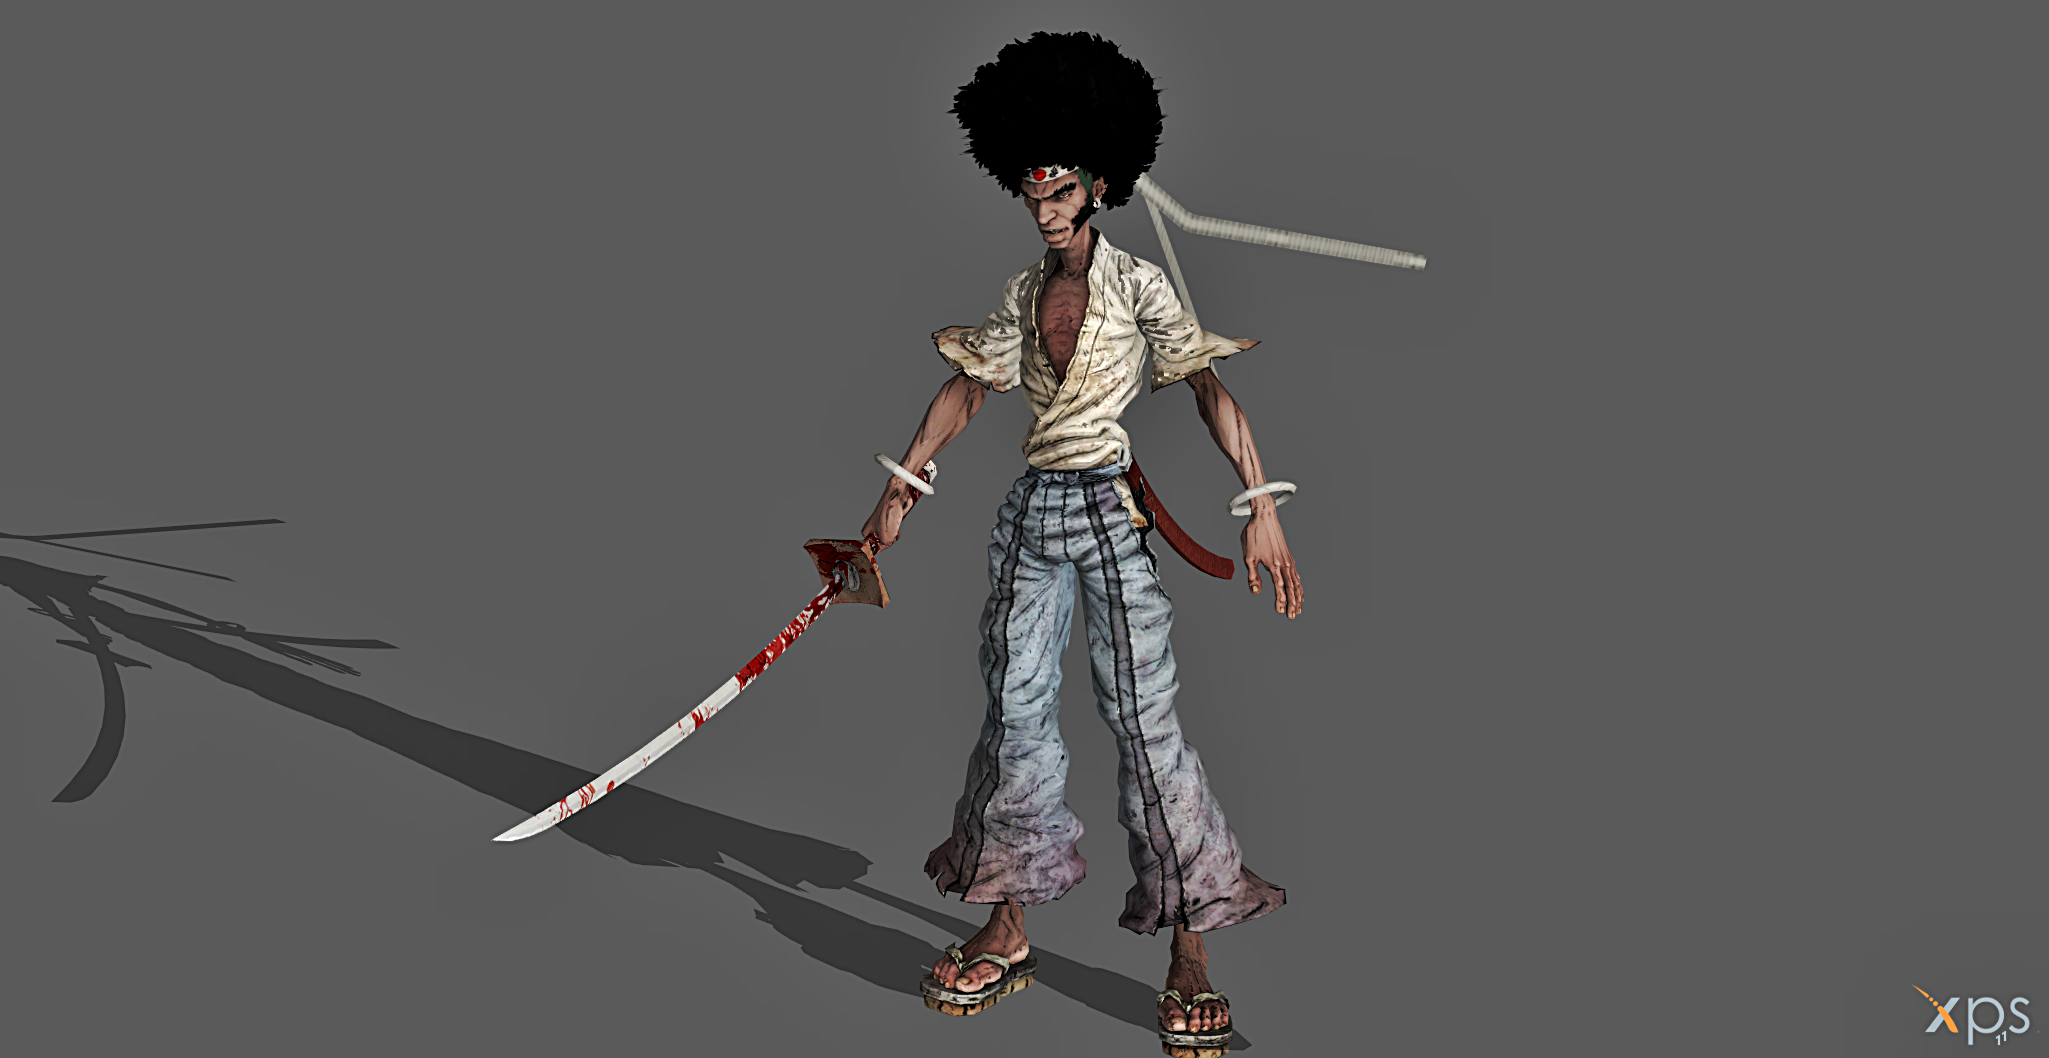 Xps Afro Samurai By Mylladinx On Deviantart from images-wixmp-ed30a86b8c4ca...